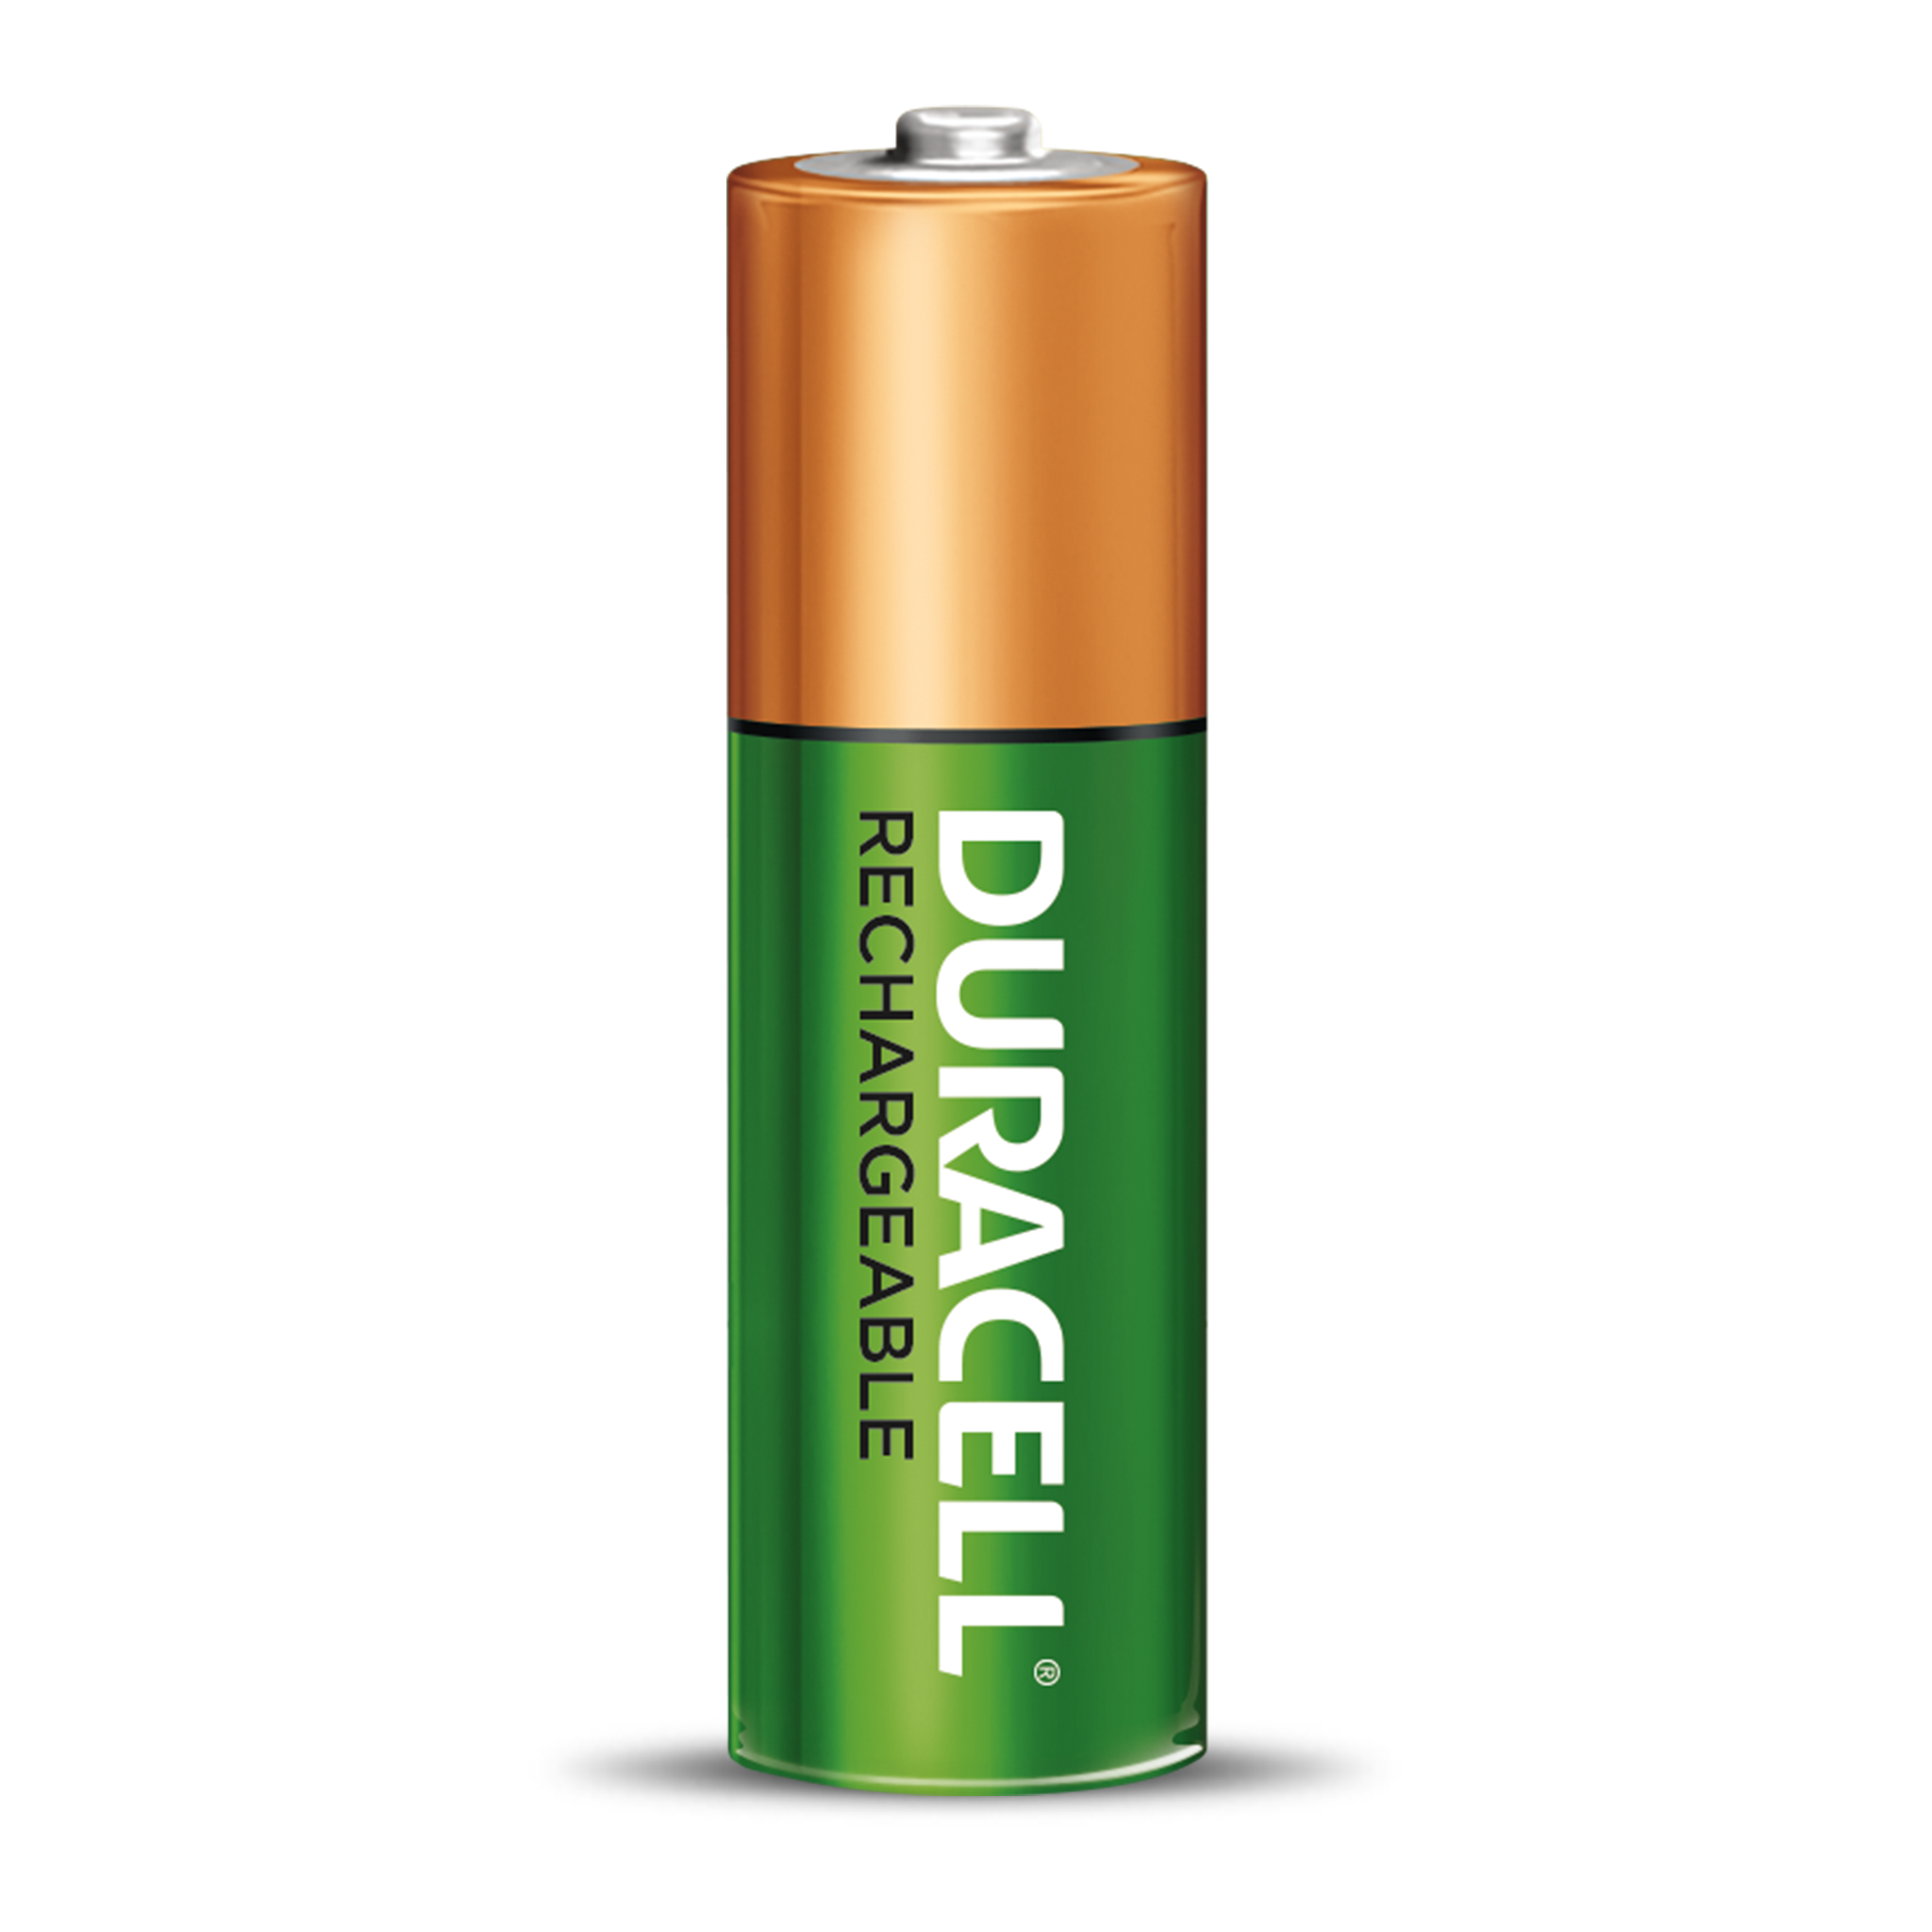 Standalone green and copper AA rechargeable battery